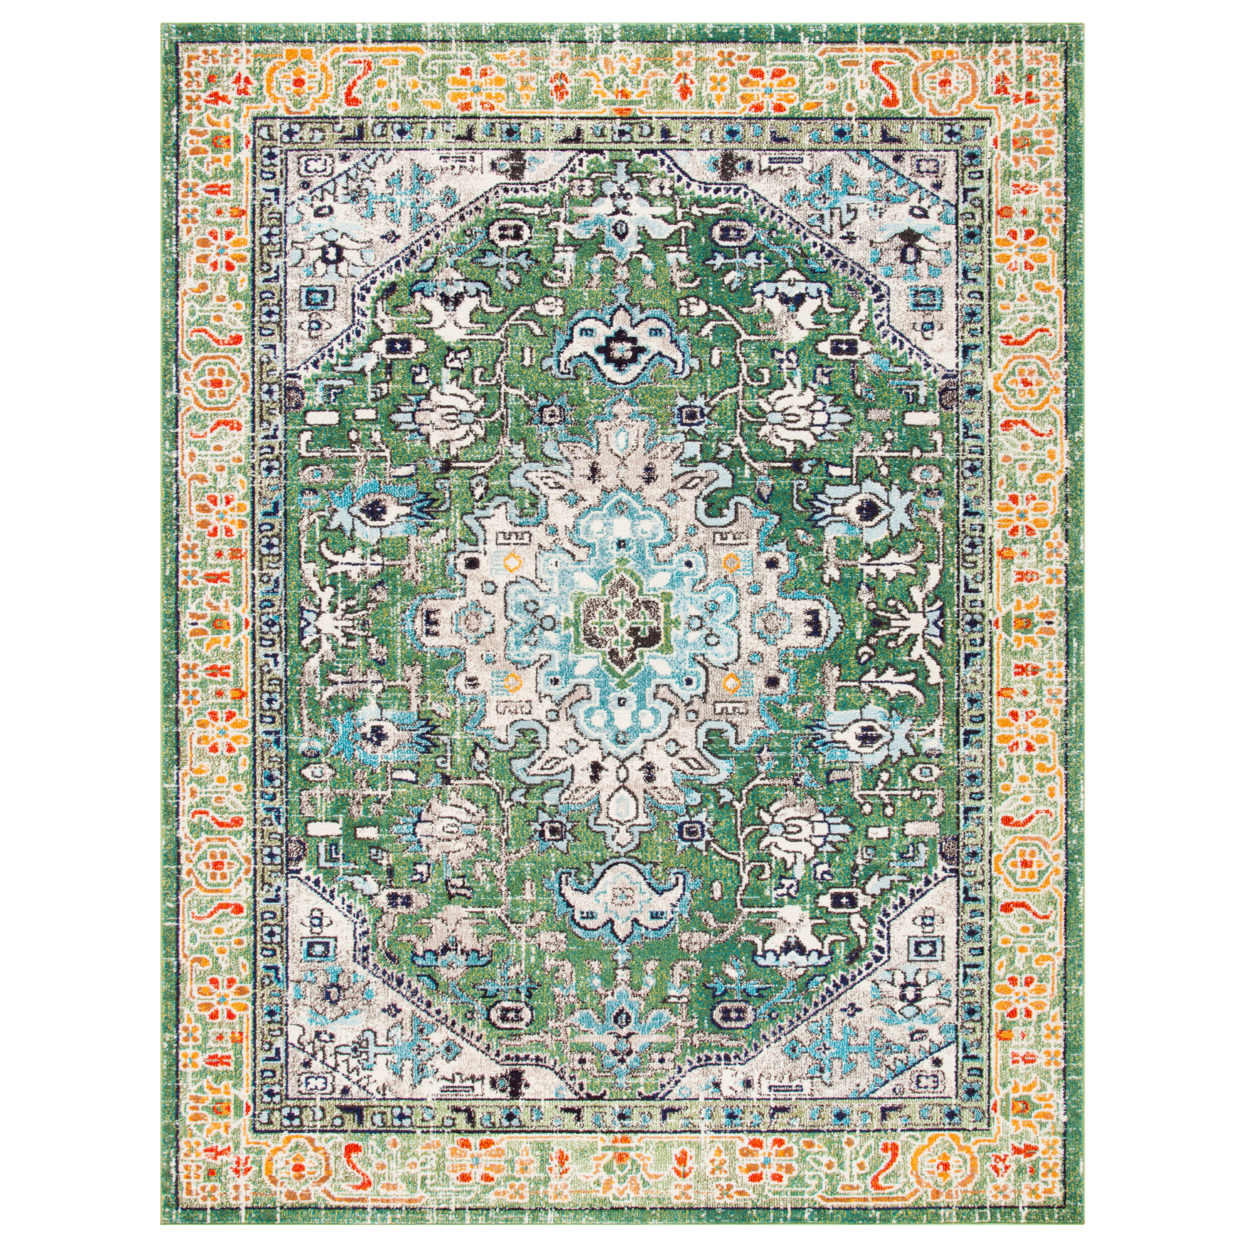 SAFAVIEH Madison Collection MAD474Y Green / Turquoise Rug - 2' 2 X 12'